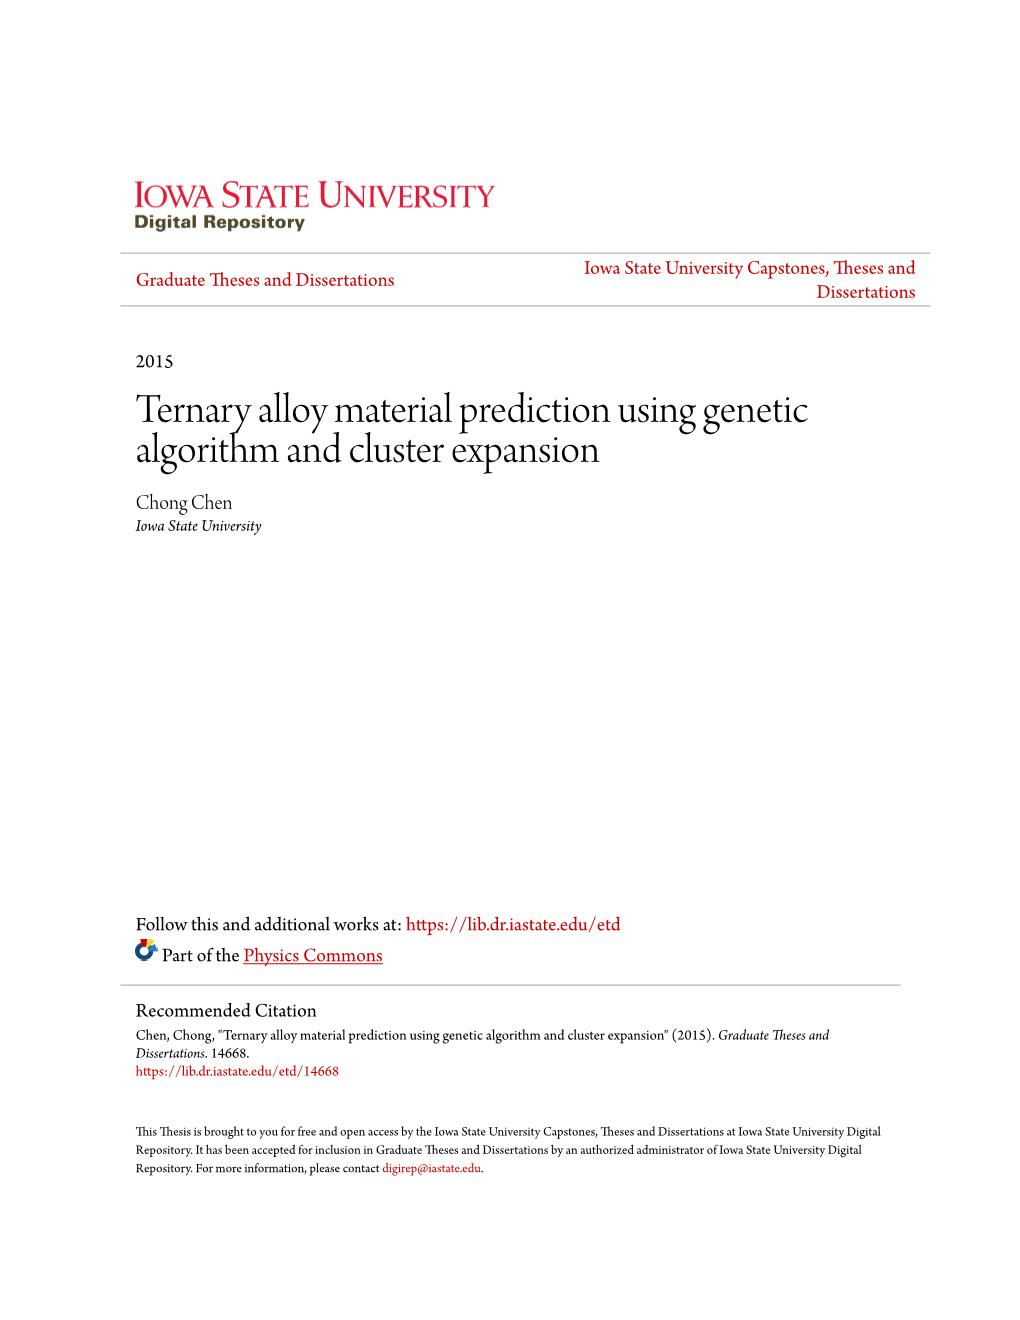 Ternary Alloy Material Prediction Using Genetic Algorithm and Cluster Expansion Chong Chen Iowa State University